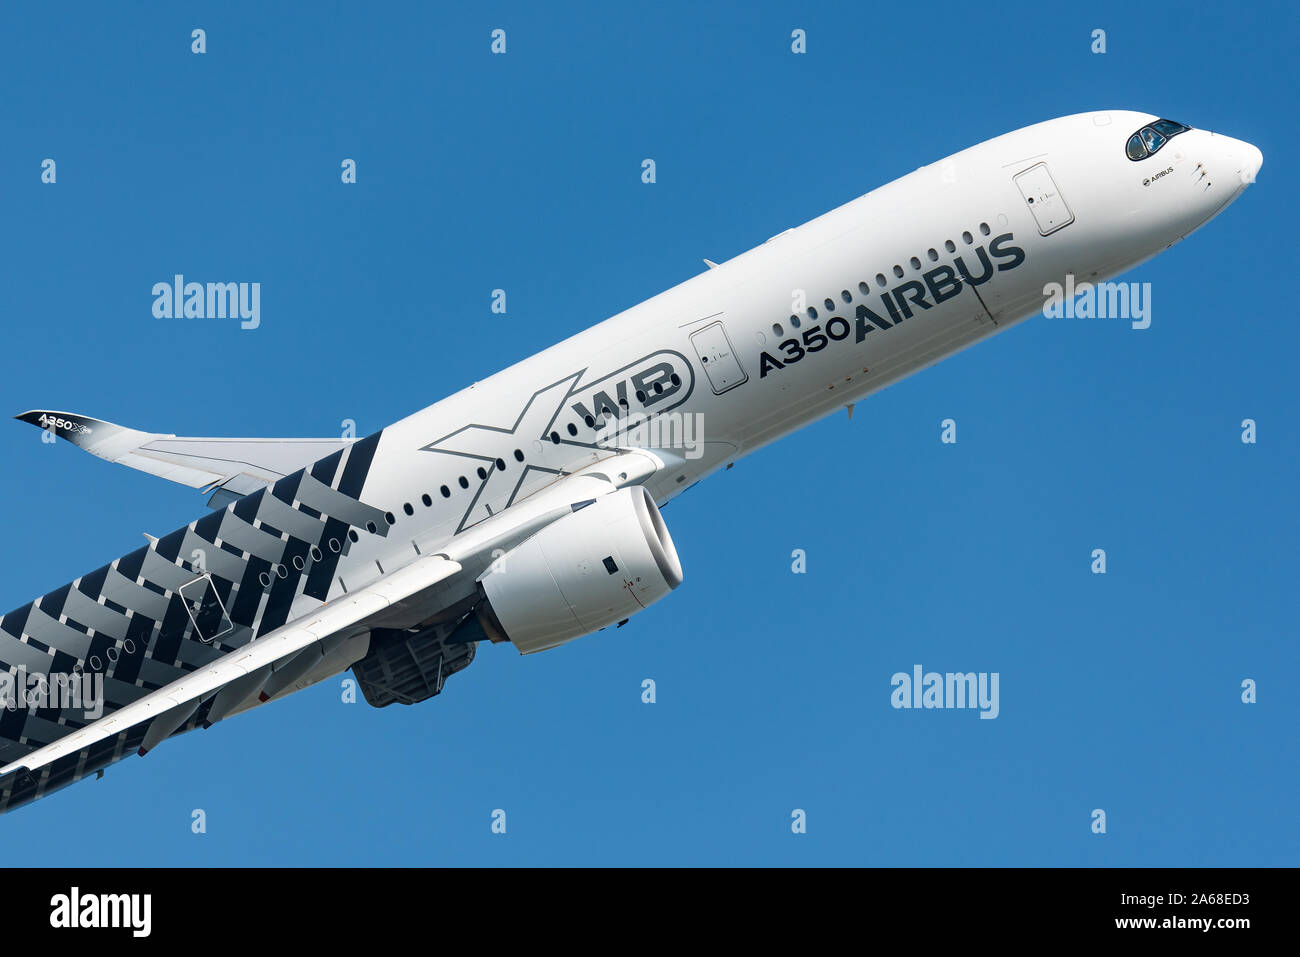 Demonstration flight of the Airbus A350 XWB long-range, twin-engine passenger airplane at the Maks 2019 airshow in Moscow. Stock Photo